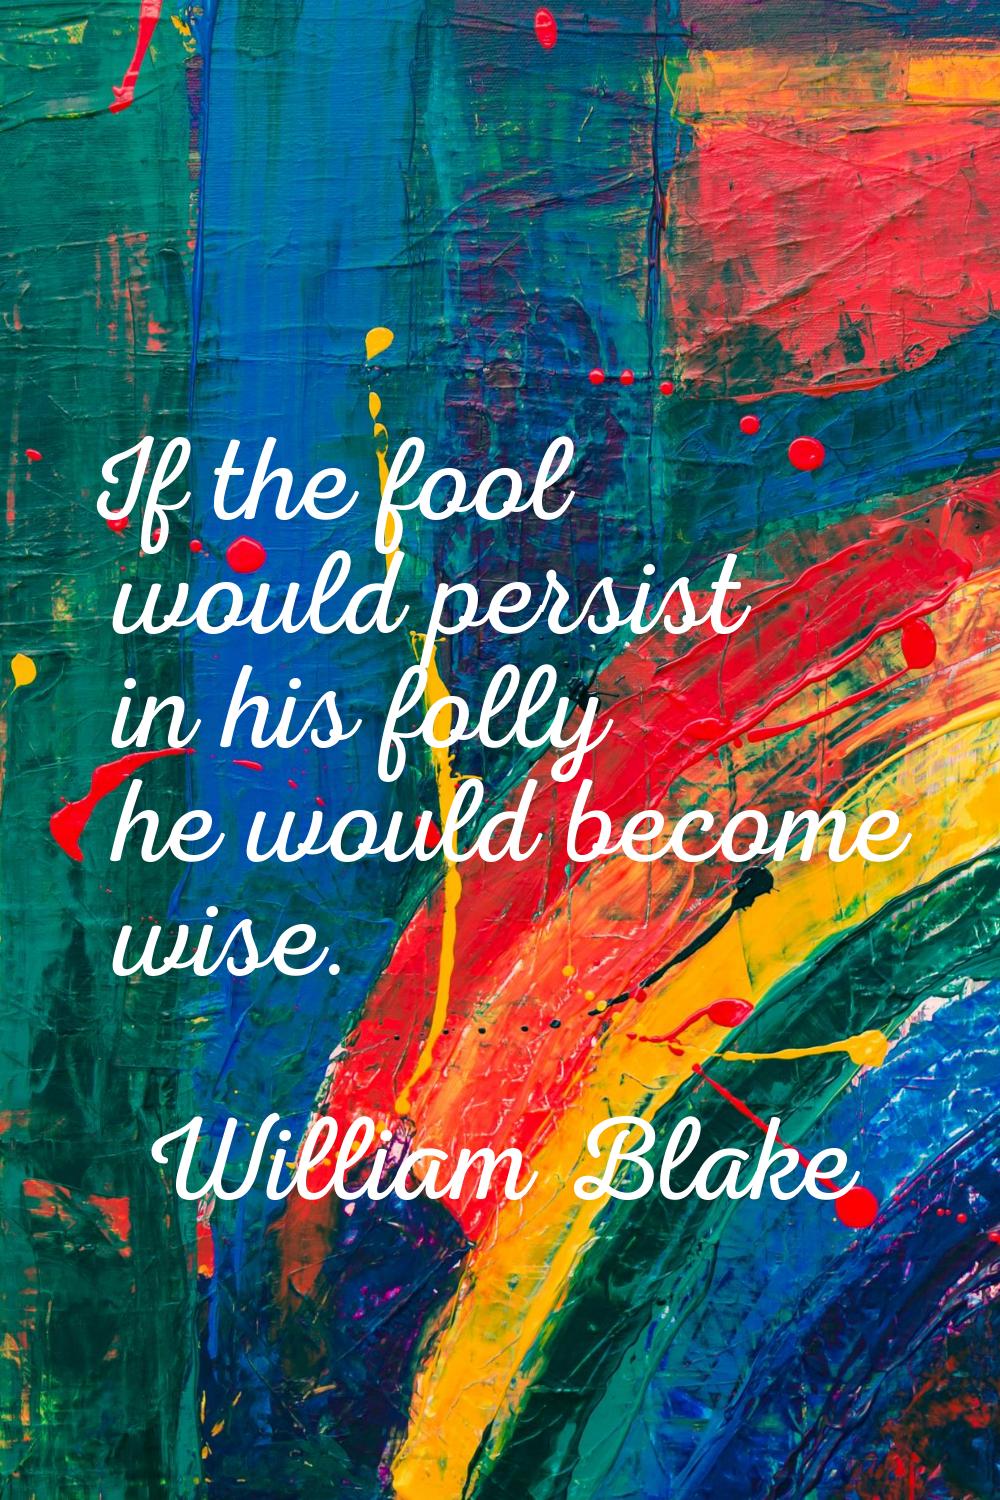 If the fool would persist in his folly he would become wise.